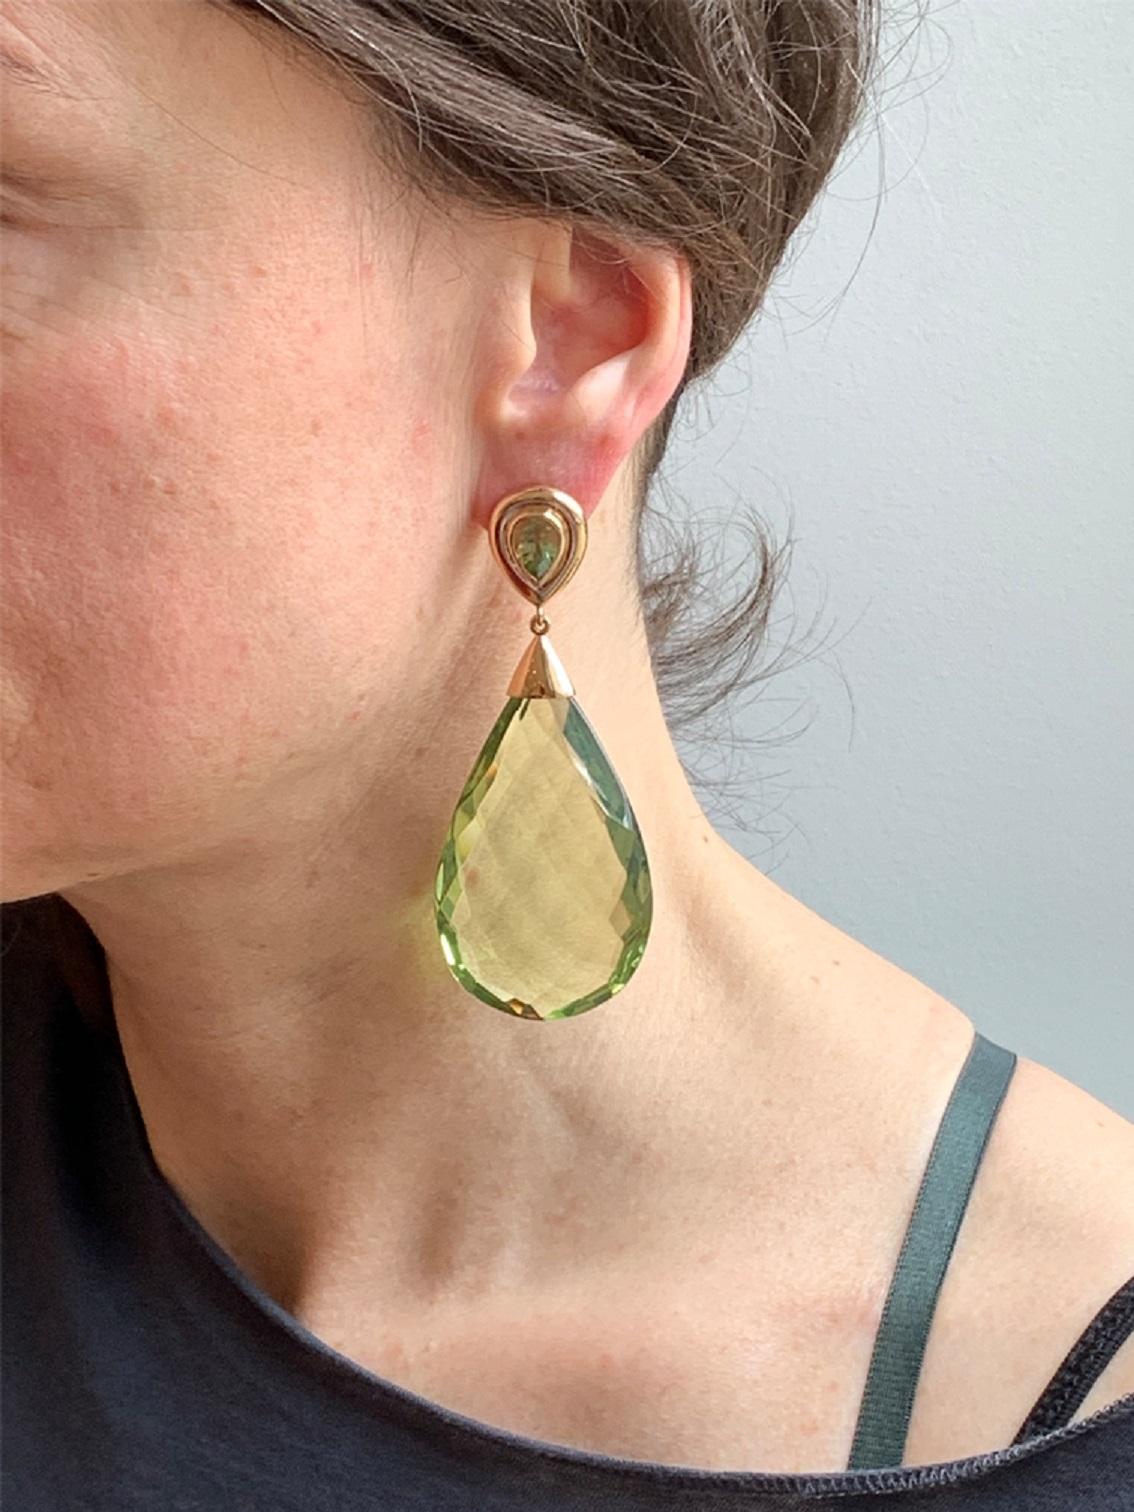 Stunning precious basics earrings, set in 18kt rose gold with 2 peridots of 4.14 ct and 2 Amber 115.67 ct.
Designed by Colleen B. Rosenblat.
